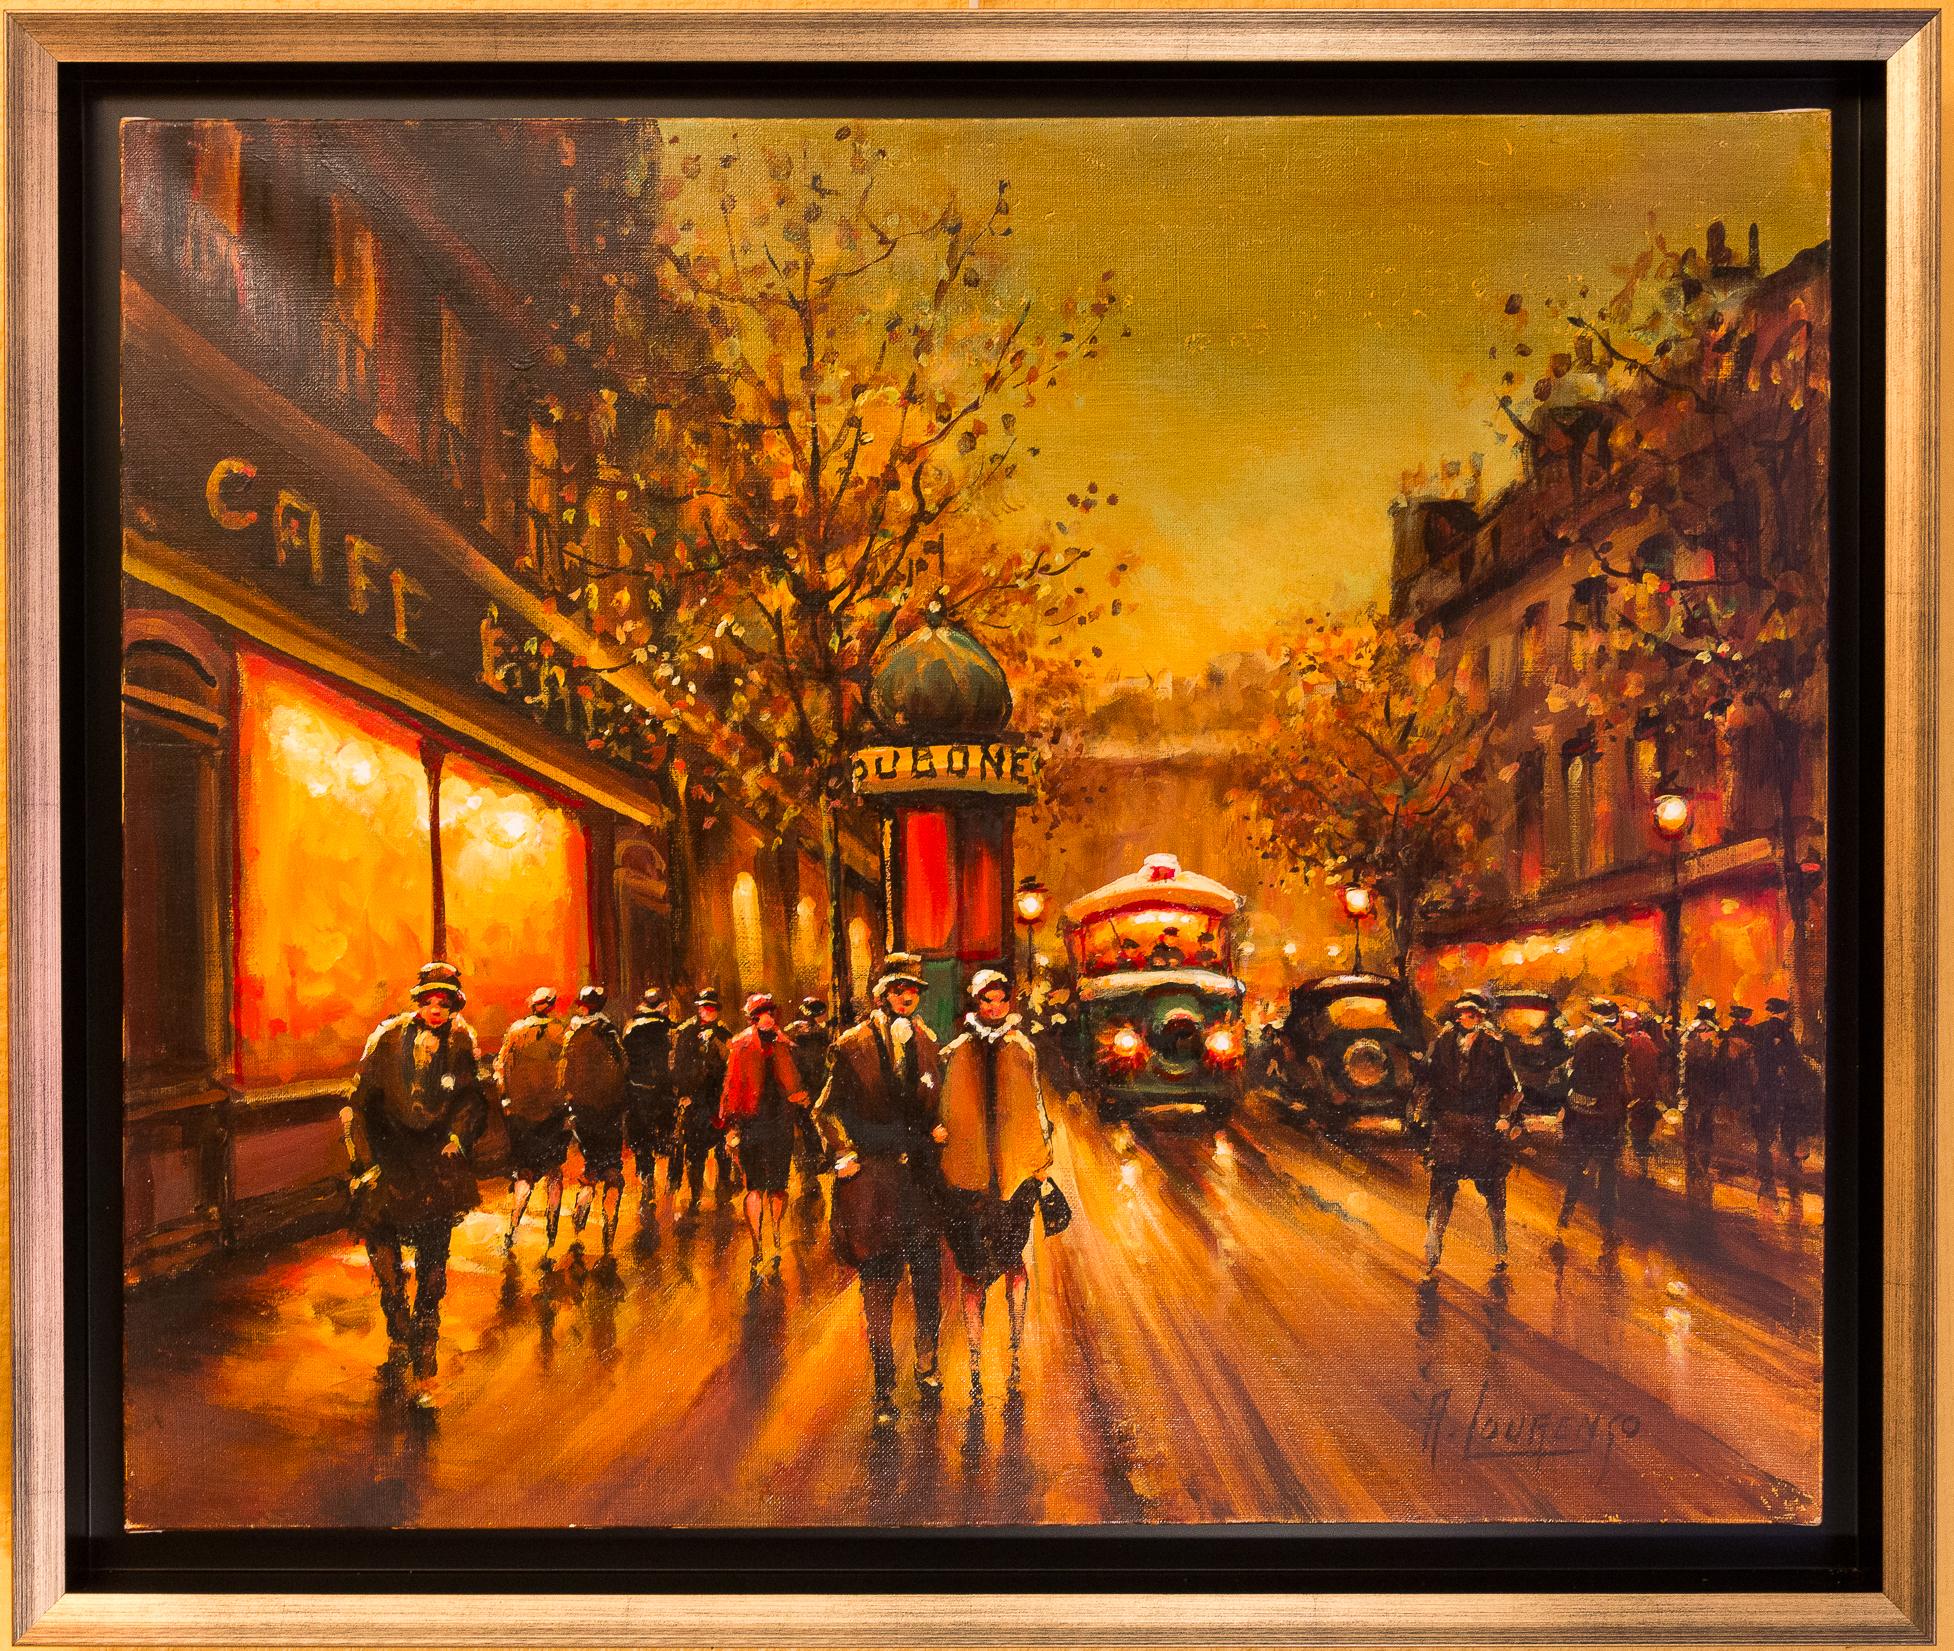 An interesting and decorative oil on canvas depicting The famous Parisian Boulevard des Capucines in 1930-1940.

Armand Lourenco made early 20th century Paris views his specialty. 

Gorgeous work of this famous painter circa